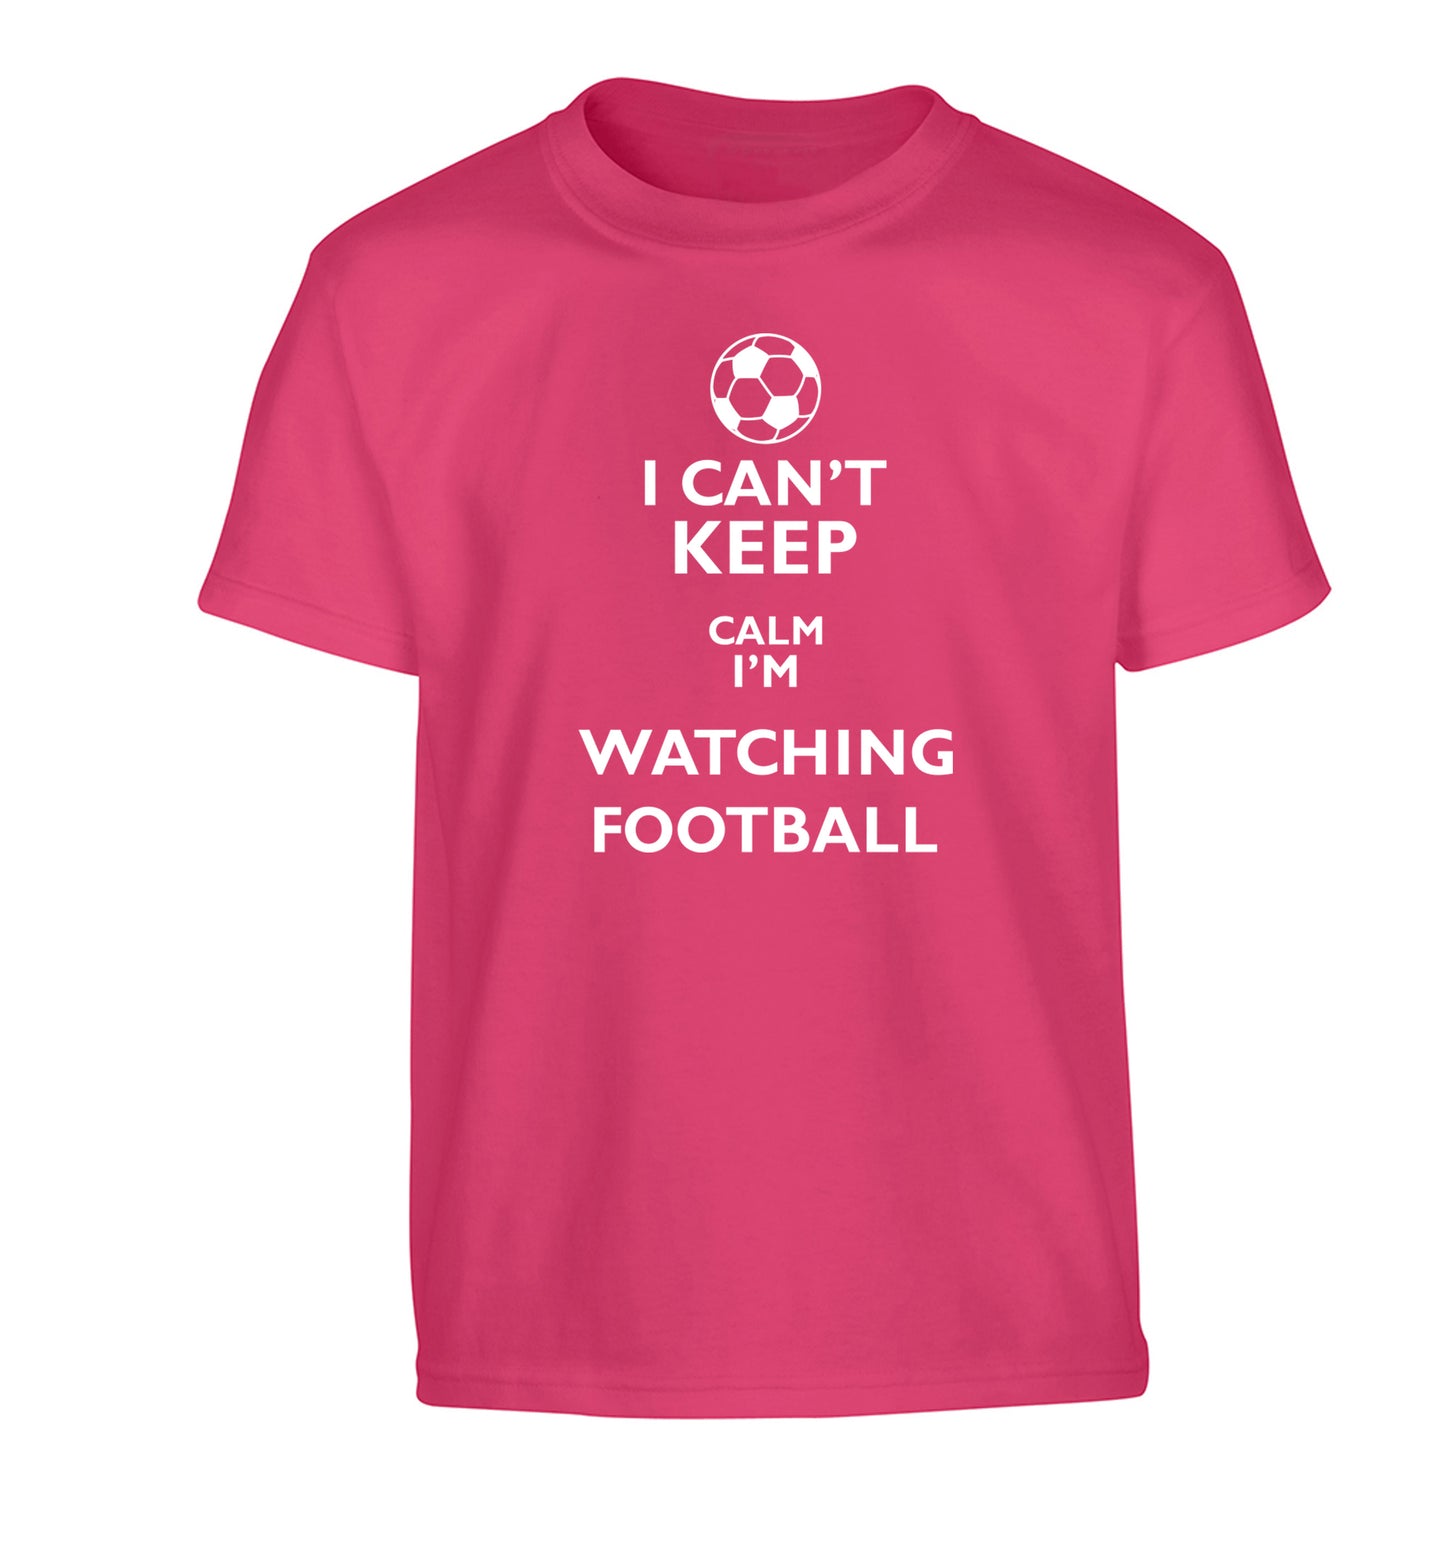 I can't keep calm I'm watching the football Children's pink Tshirt 12-14 Years